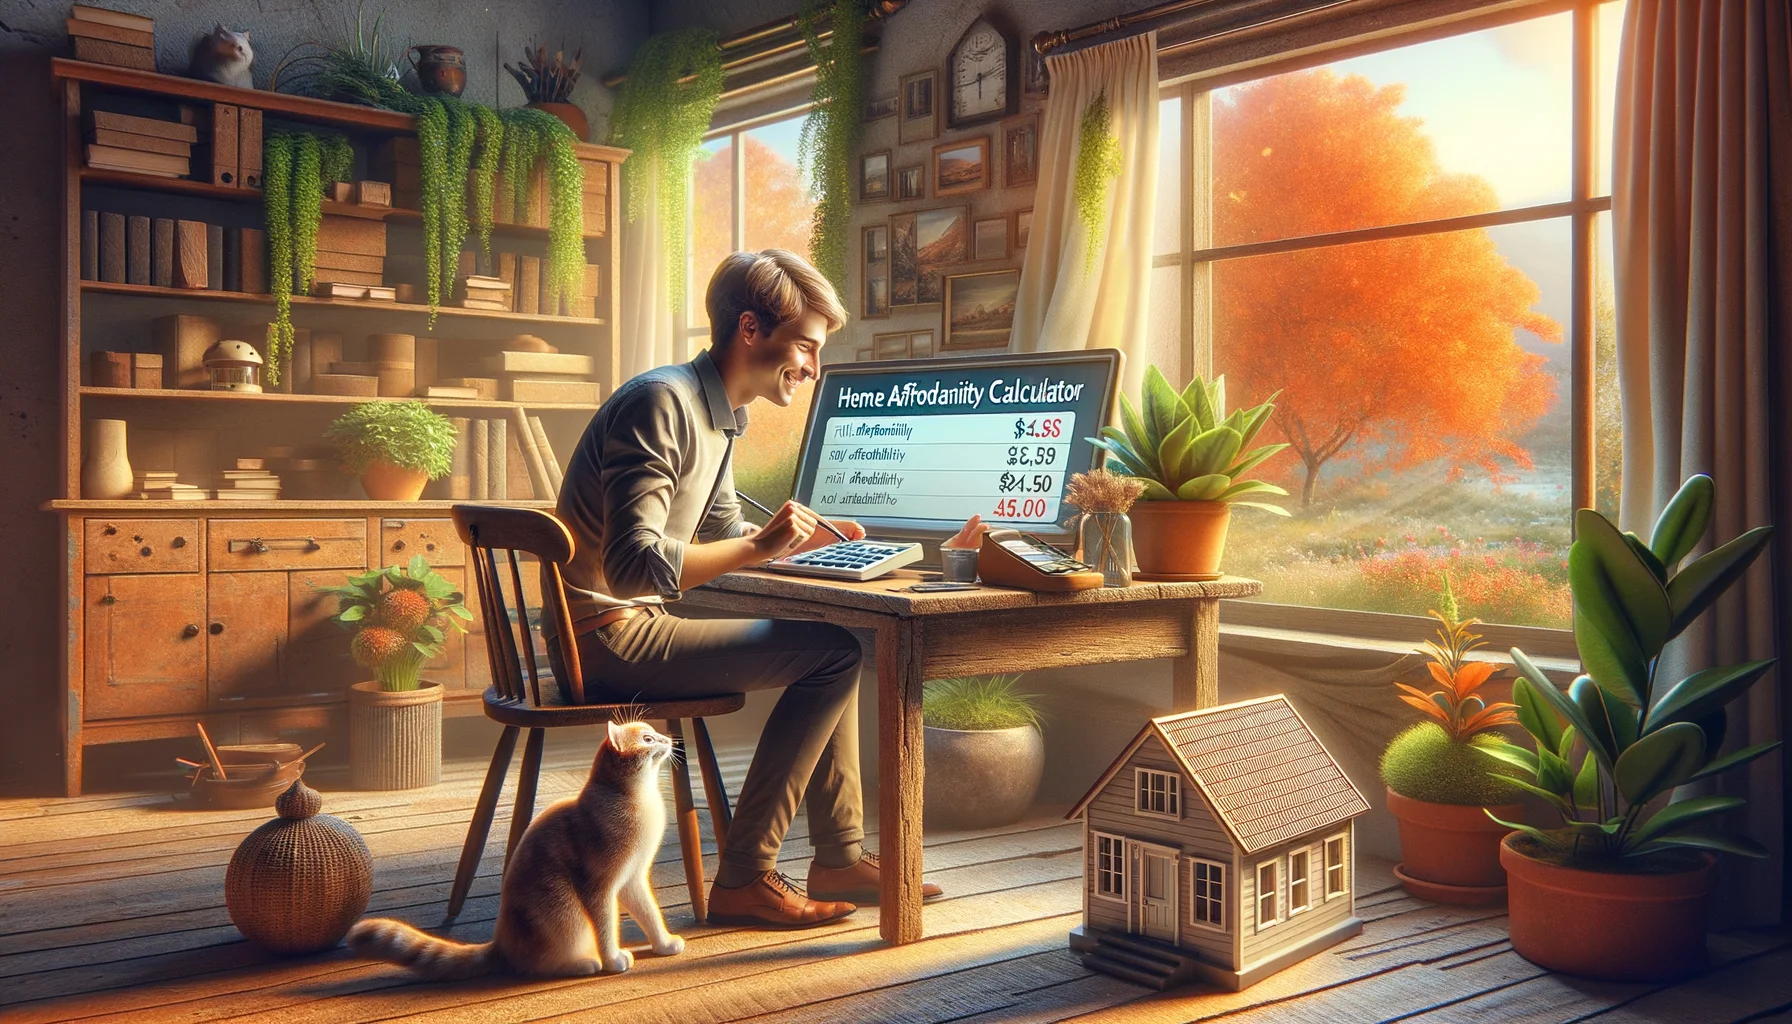 Generate a chucklesome, realistic illustration showing an idyllic situation of someone using a home affordability calculator. Heavy on whimsy, the scene consists of a young Caucasian male sitting at a rustic wooden desk, in a sunlit room abundant with house plants. On his screen, a home affordability calculator displays the most perfect results - full affordability for a dream house. Laced with humuor, a pet cat next to him, nonchalantly swipes its paw at a tiny house model kept next to the screen. Outside the window, a beautiful rush of autumn colors adds a magical touch to the scenario.